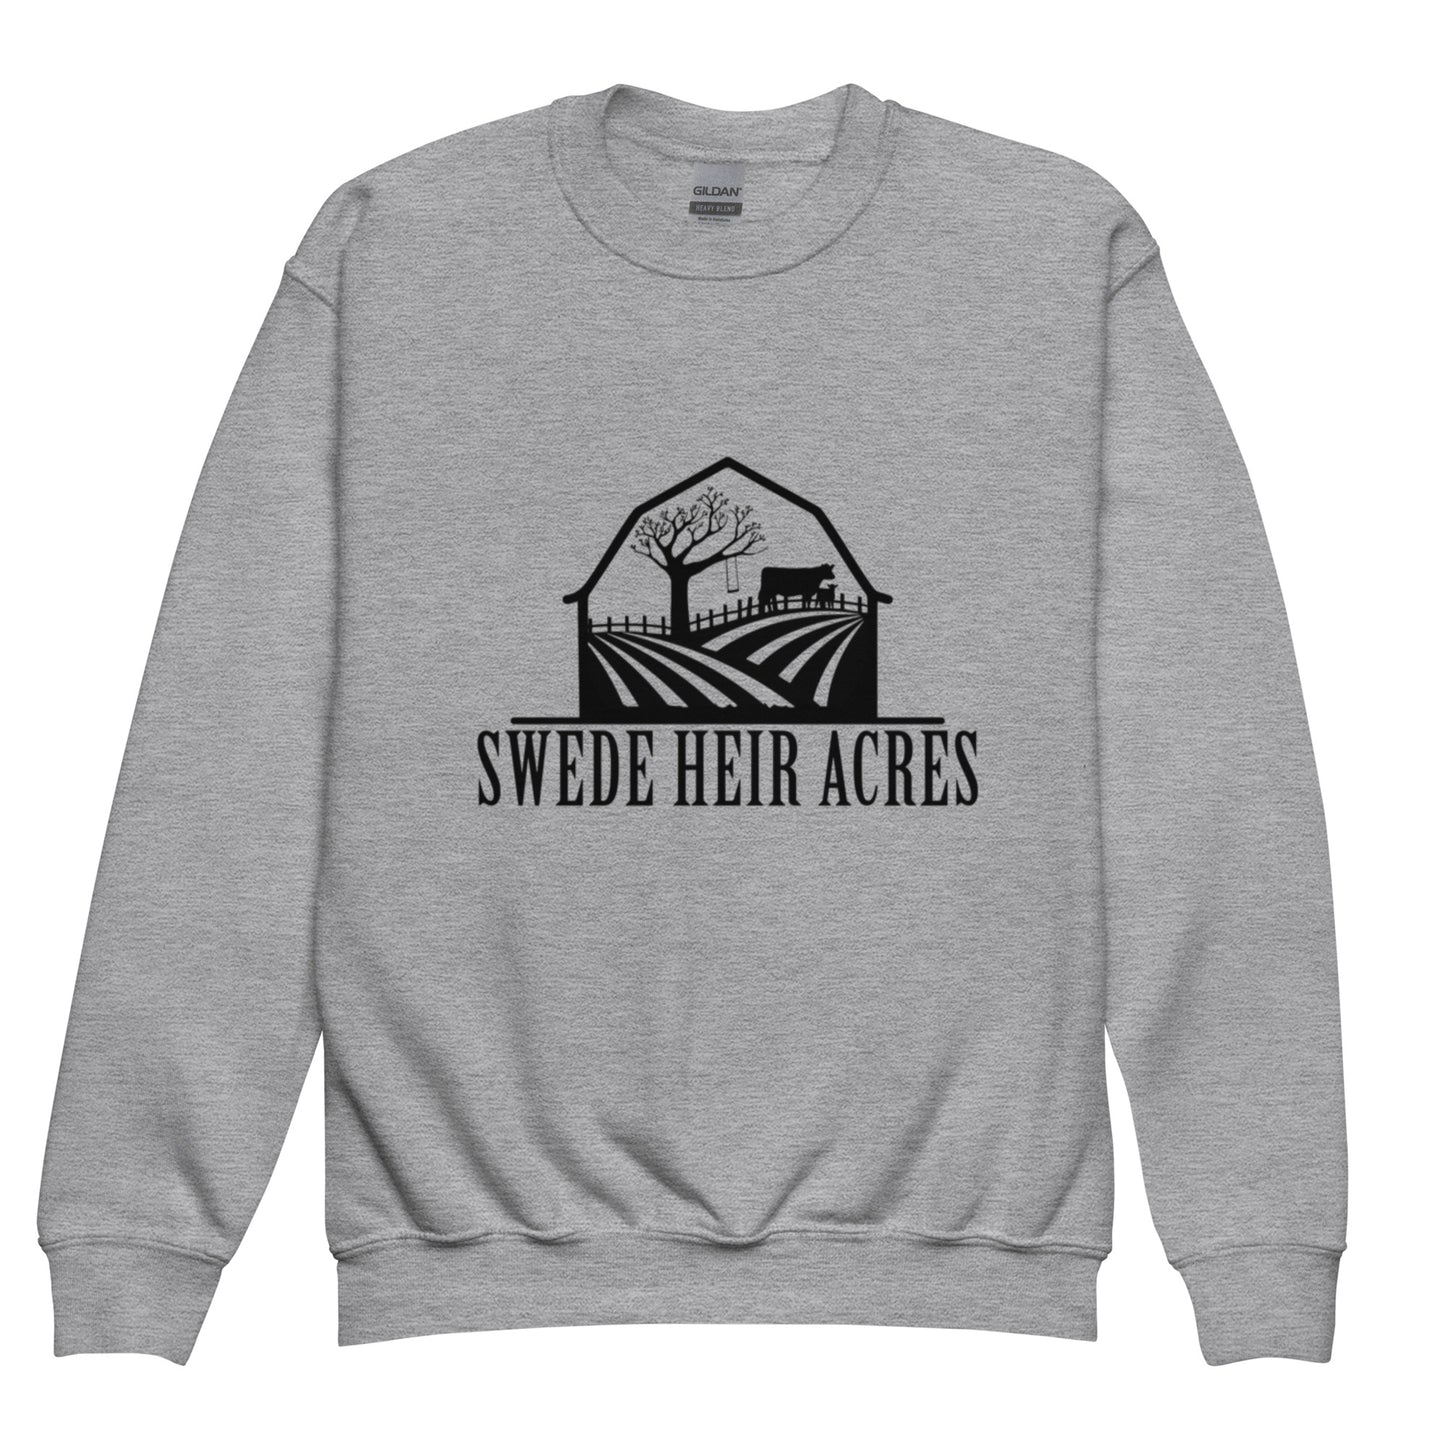 SWEDE HEIR ACRES - YOUTH CREW